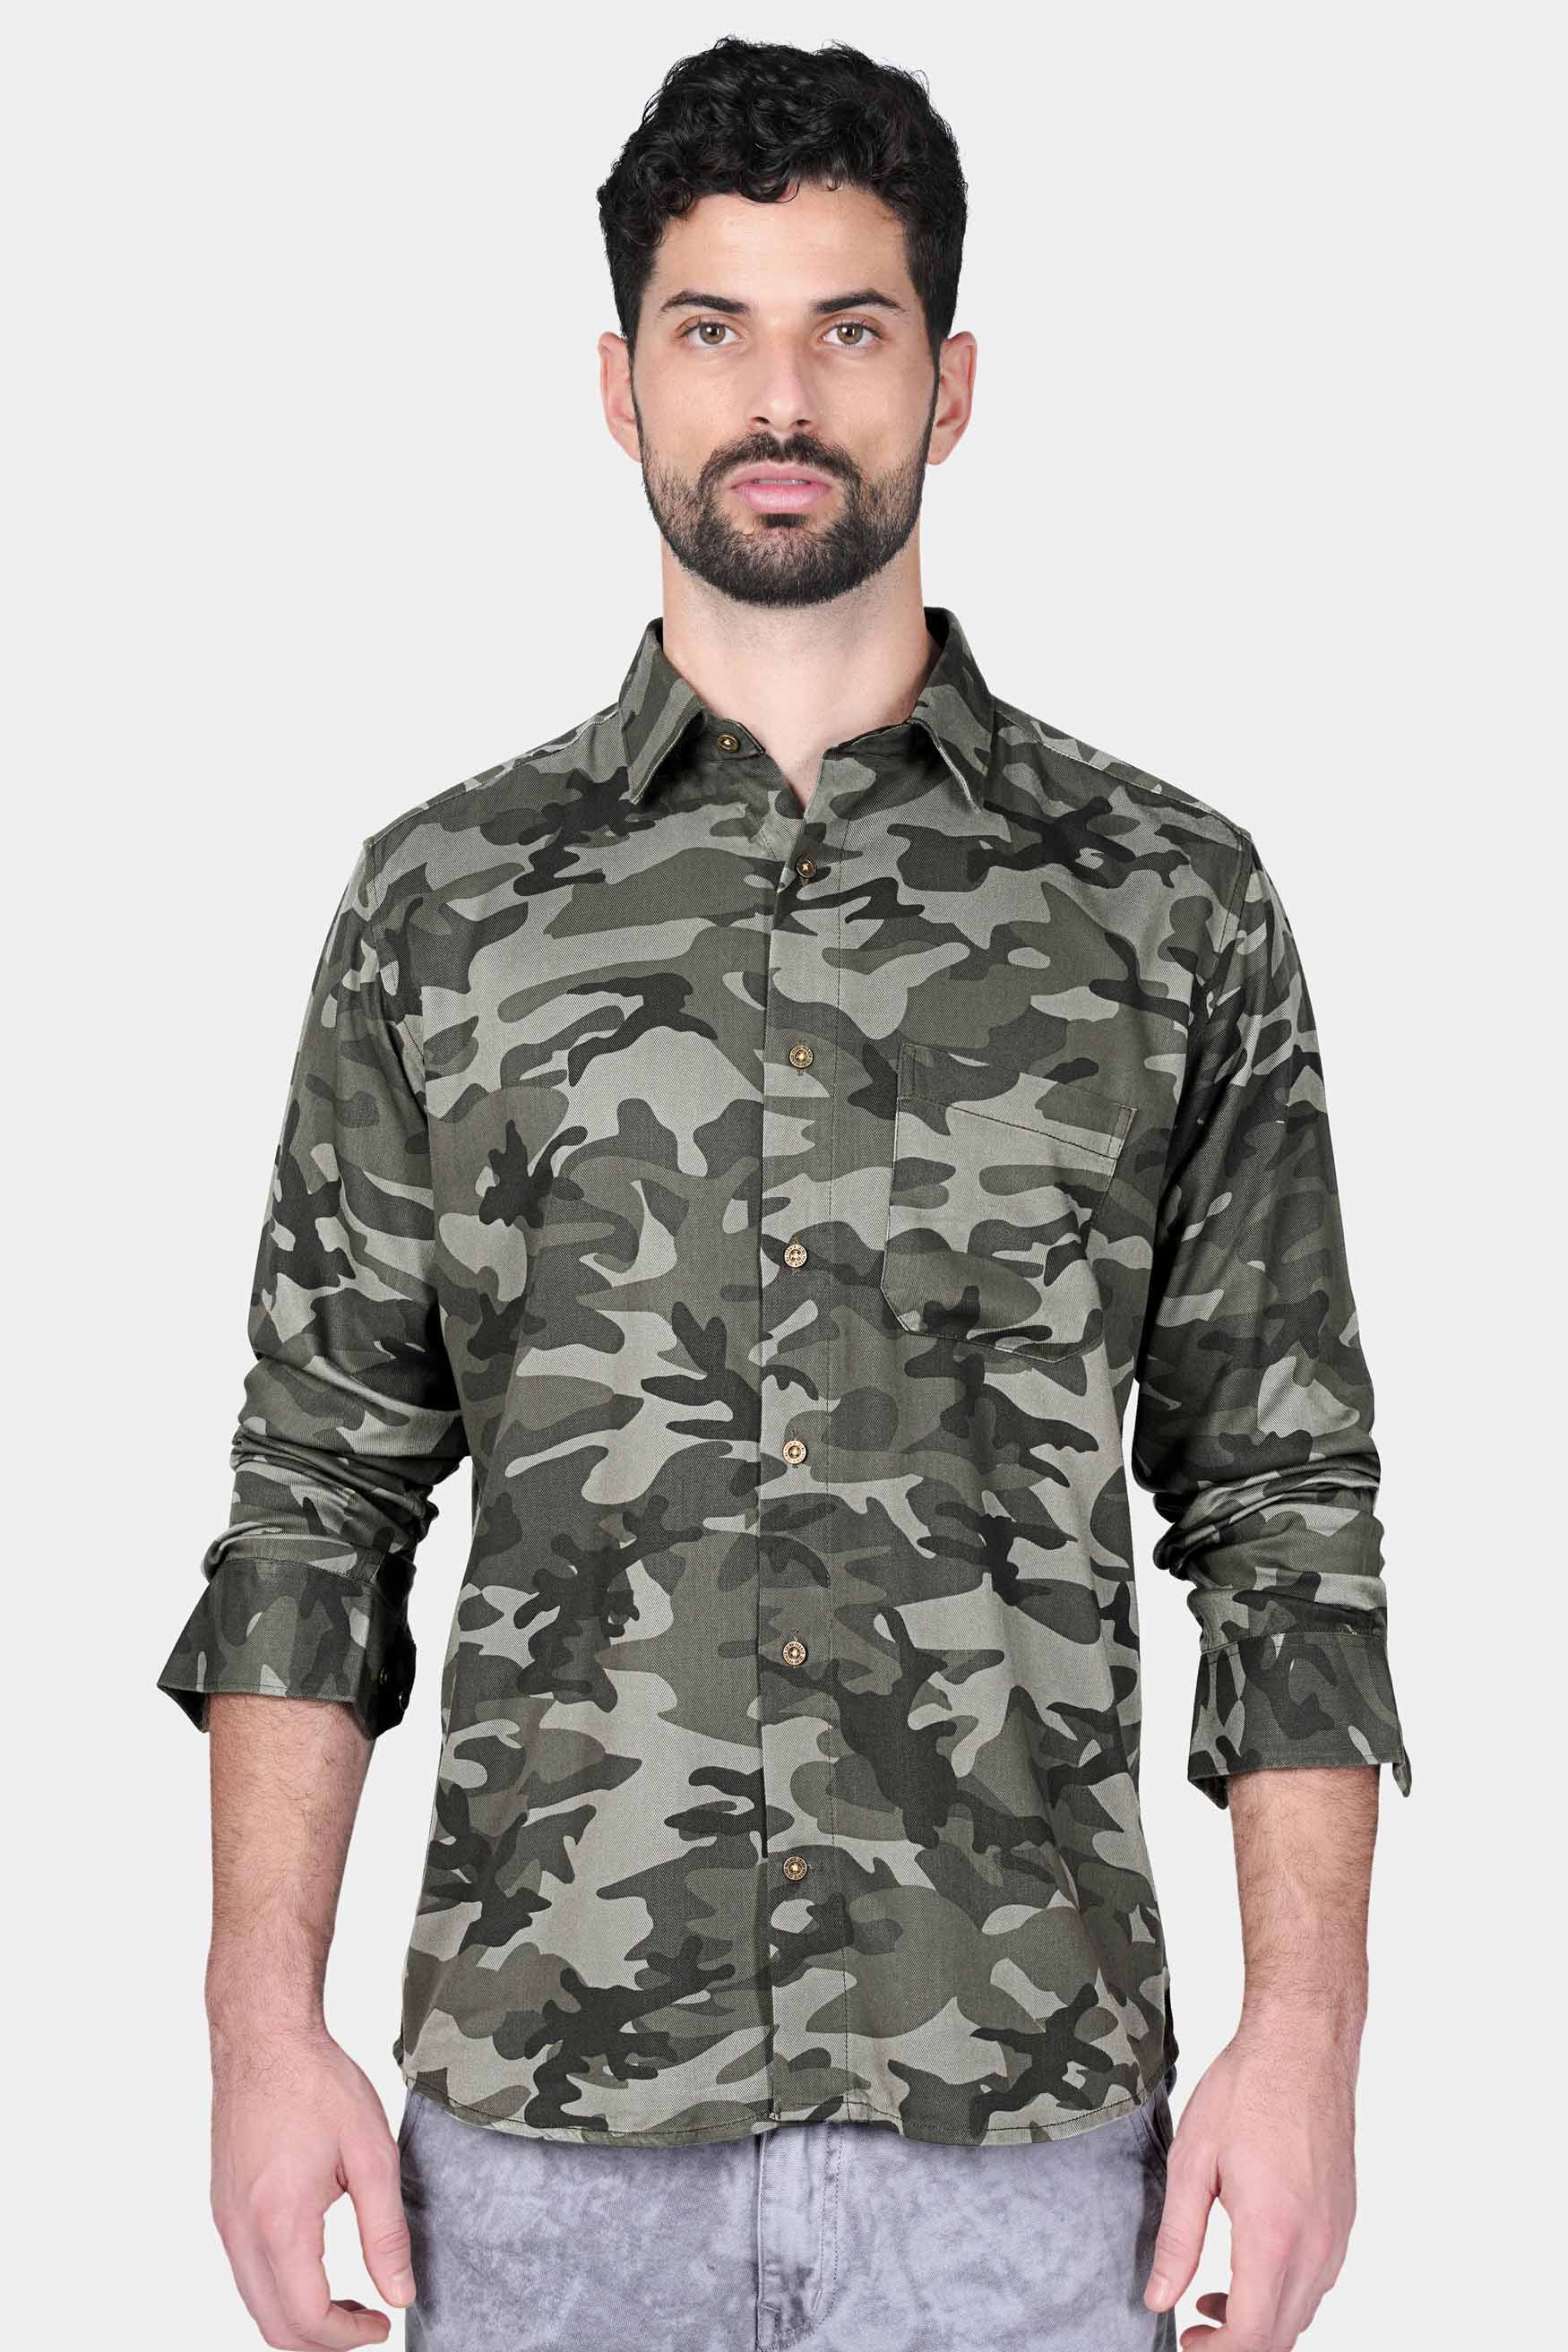 Oyster Green and Fuscous Green Camouflage with Funky Printed Premium Tencel Designer Shirt 8904-MB-RPRT120-38, 8904-MB-RPRT120-H-38, 8904-MB-RPRT120-39, 8904-MB-RPRT120-H-39, 8904-MB-RPRT120-40, 8904-MB-RPRT120-H-40, 8904-MB-RPRT120-42, 8904-MB-RPRT120-H-42, 8904-MB-RPRT120-44, 8904-MB-RPRT120-H-44, 8904-MB-RPRT120-46, 8904-MB-RPRT120-H-46, 8904-MB-RPRT120-48, 8904-MB-RPRT120-H-48, 8904-MB-RPRT120-50, 8904-MB-RPRT120-H-50, 8904-MB-RPRT120-52, 8904-MB-RPRT120-H-52